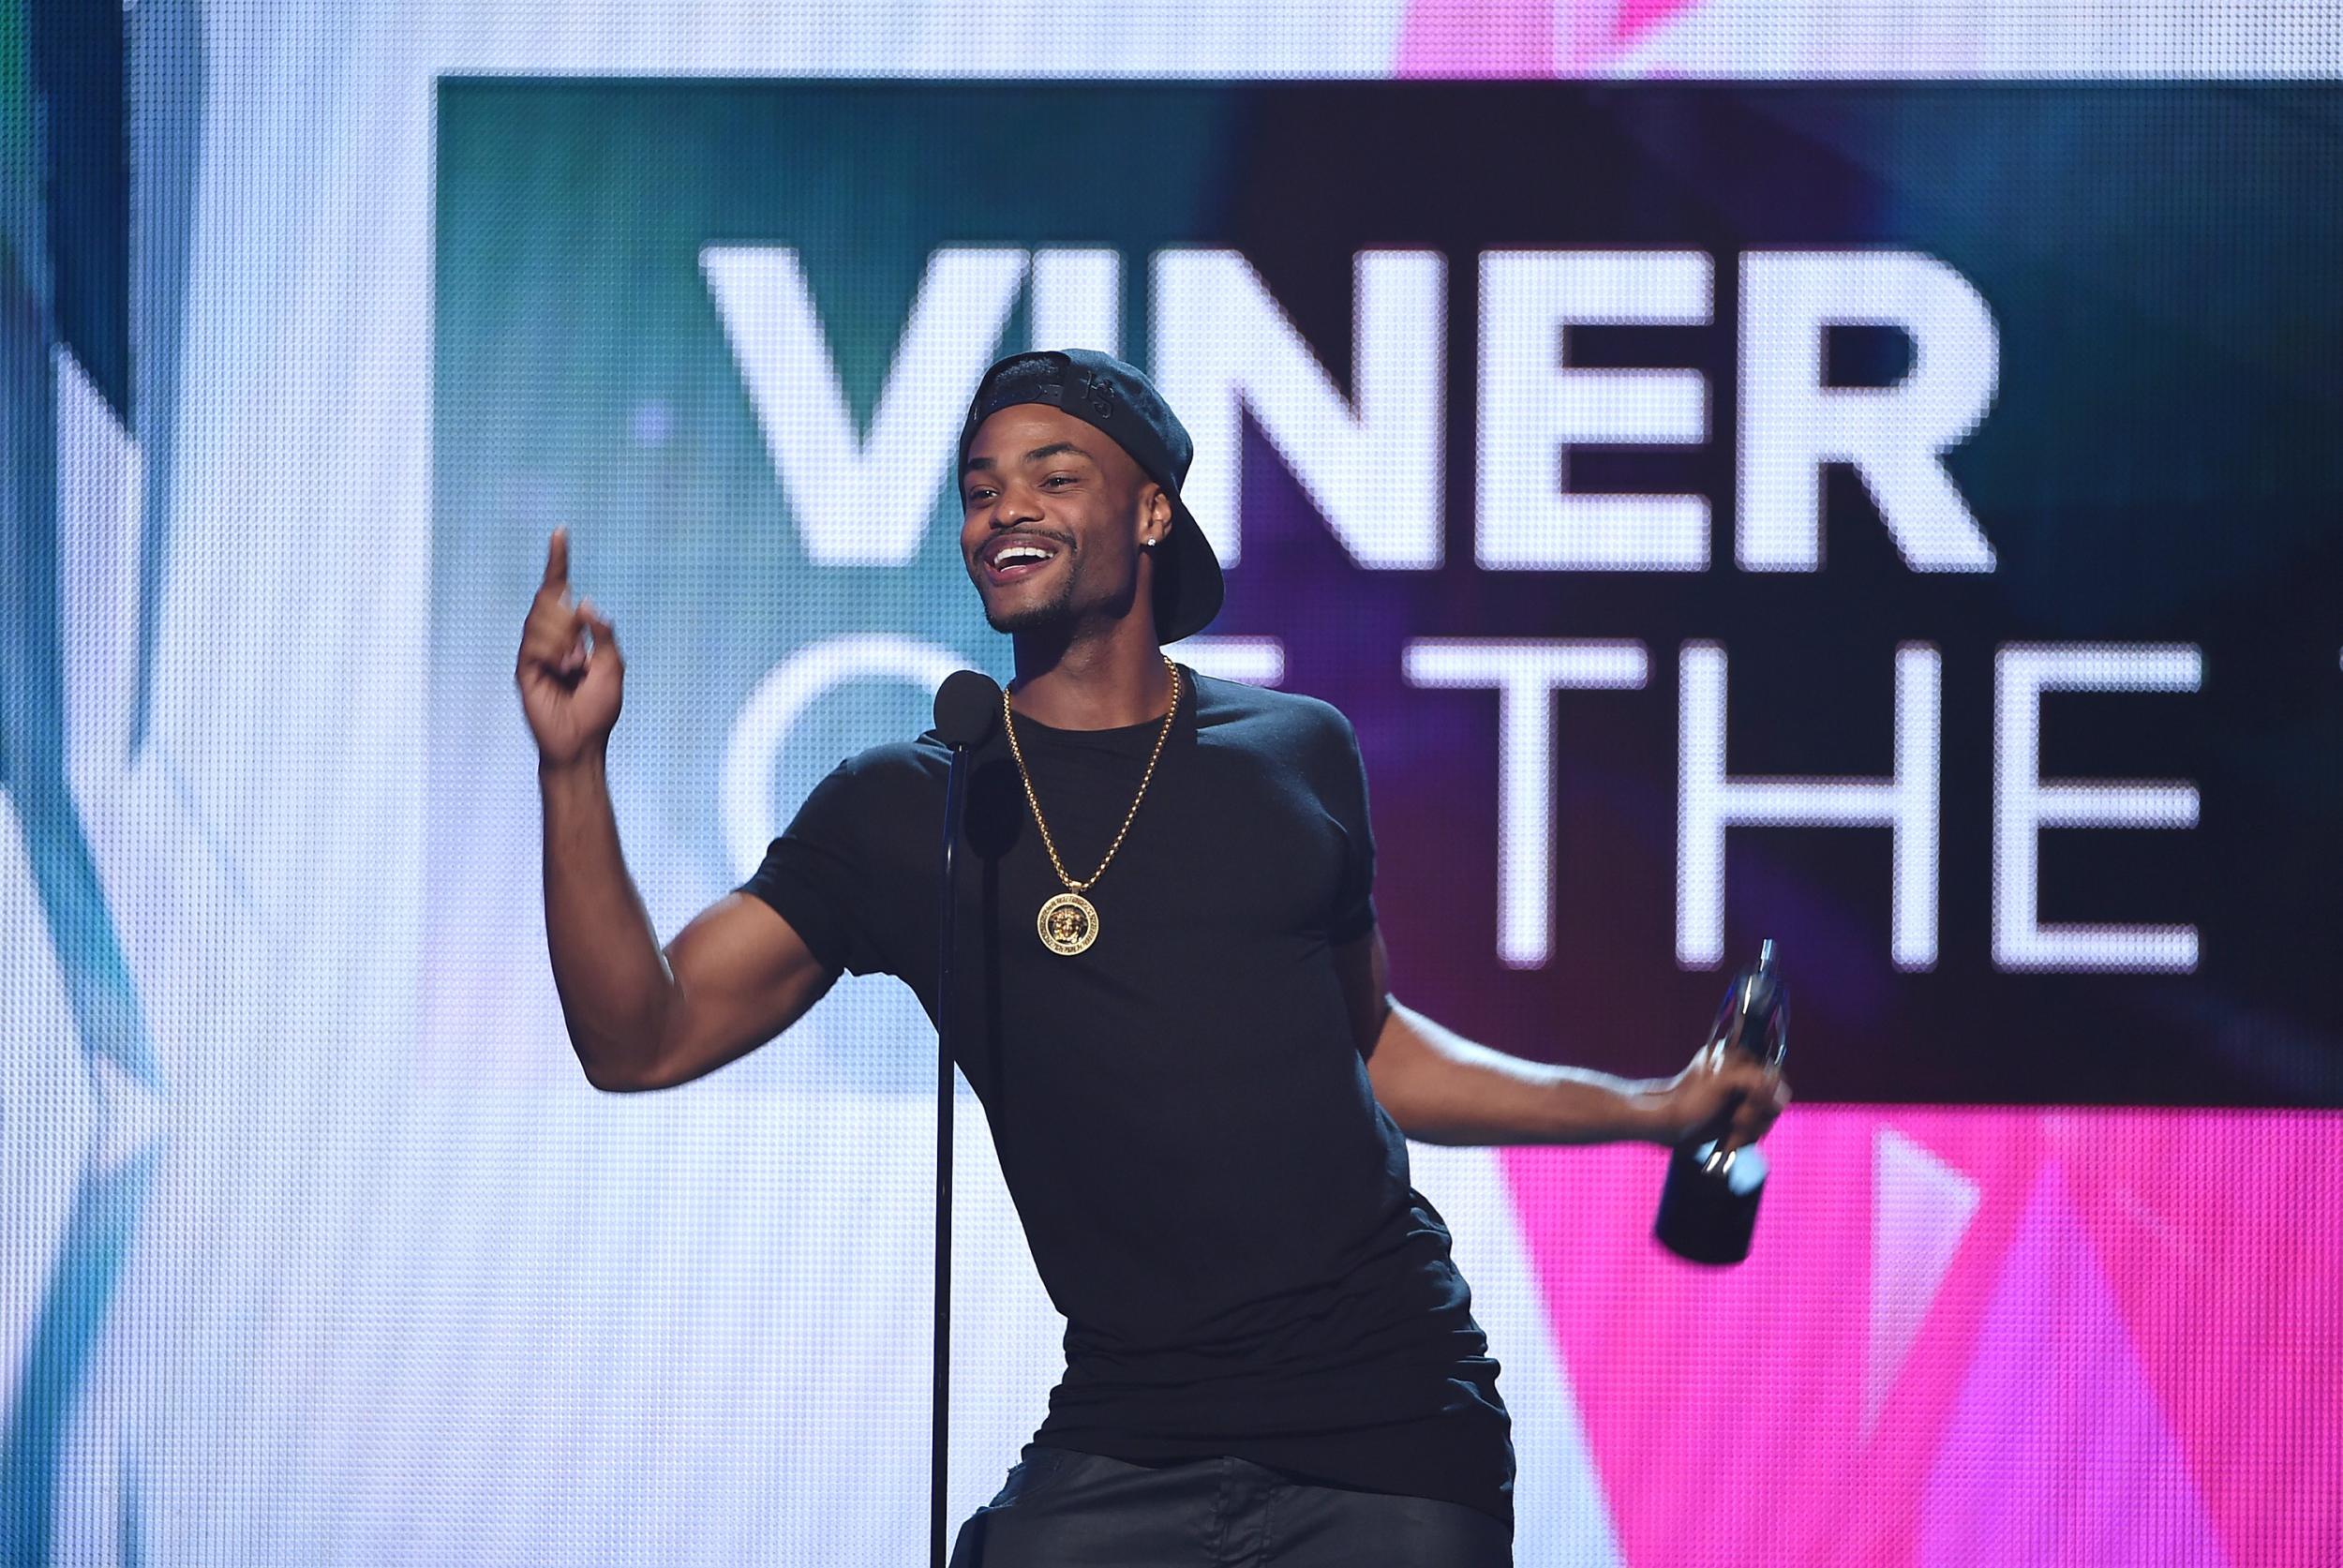 Internet personality Andrew B. Bachelor, aka King Bach accepts the award for Viner of the Year at VH1's 5th Annual Streamy Awards at the Hollywood Palladium on Thursday, September 17, 2015 in Los Angeles